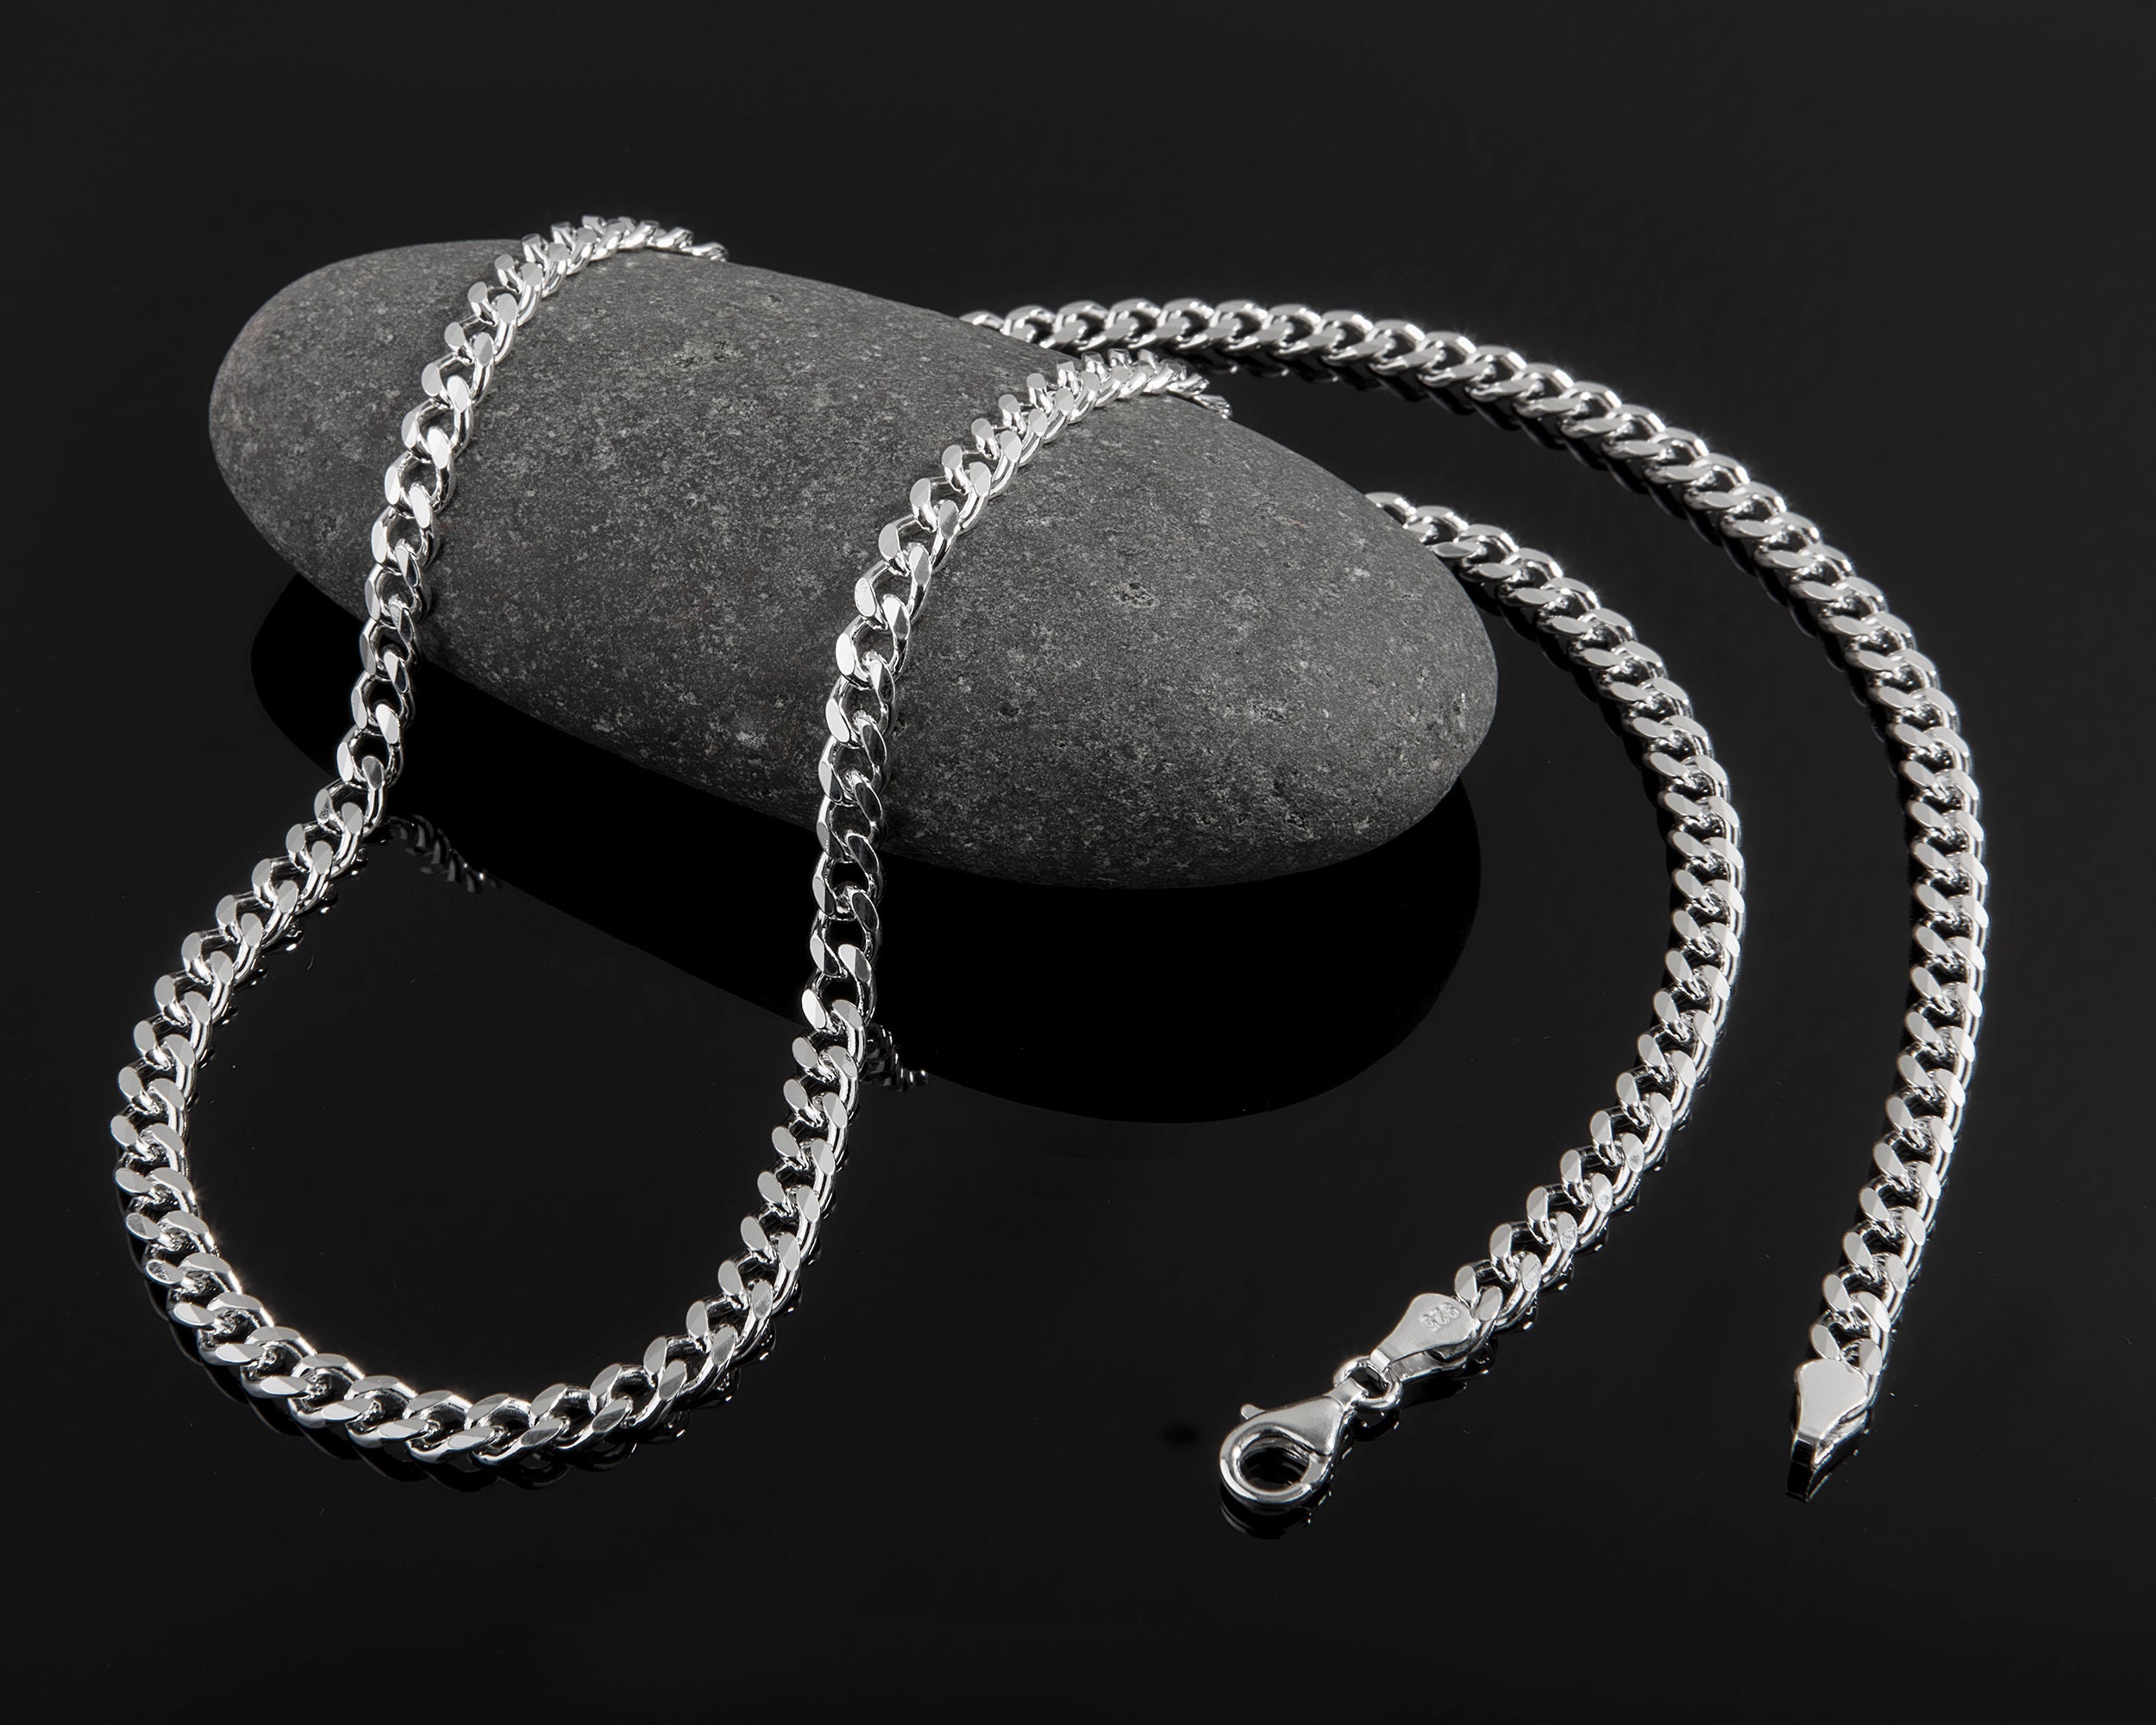 JOSCO 6.5mm Thick Hollow Rope Necklace. Italian .925 Sterling Silver Chain.  18,20,22,24,30 Inches